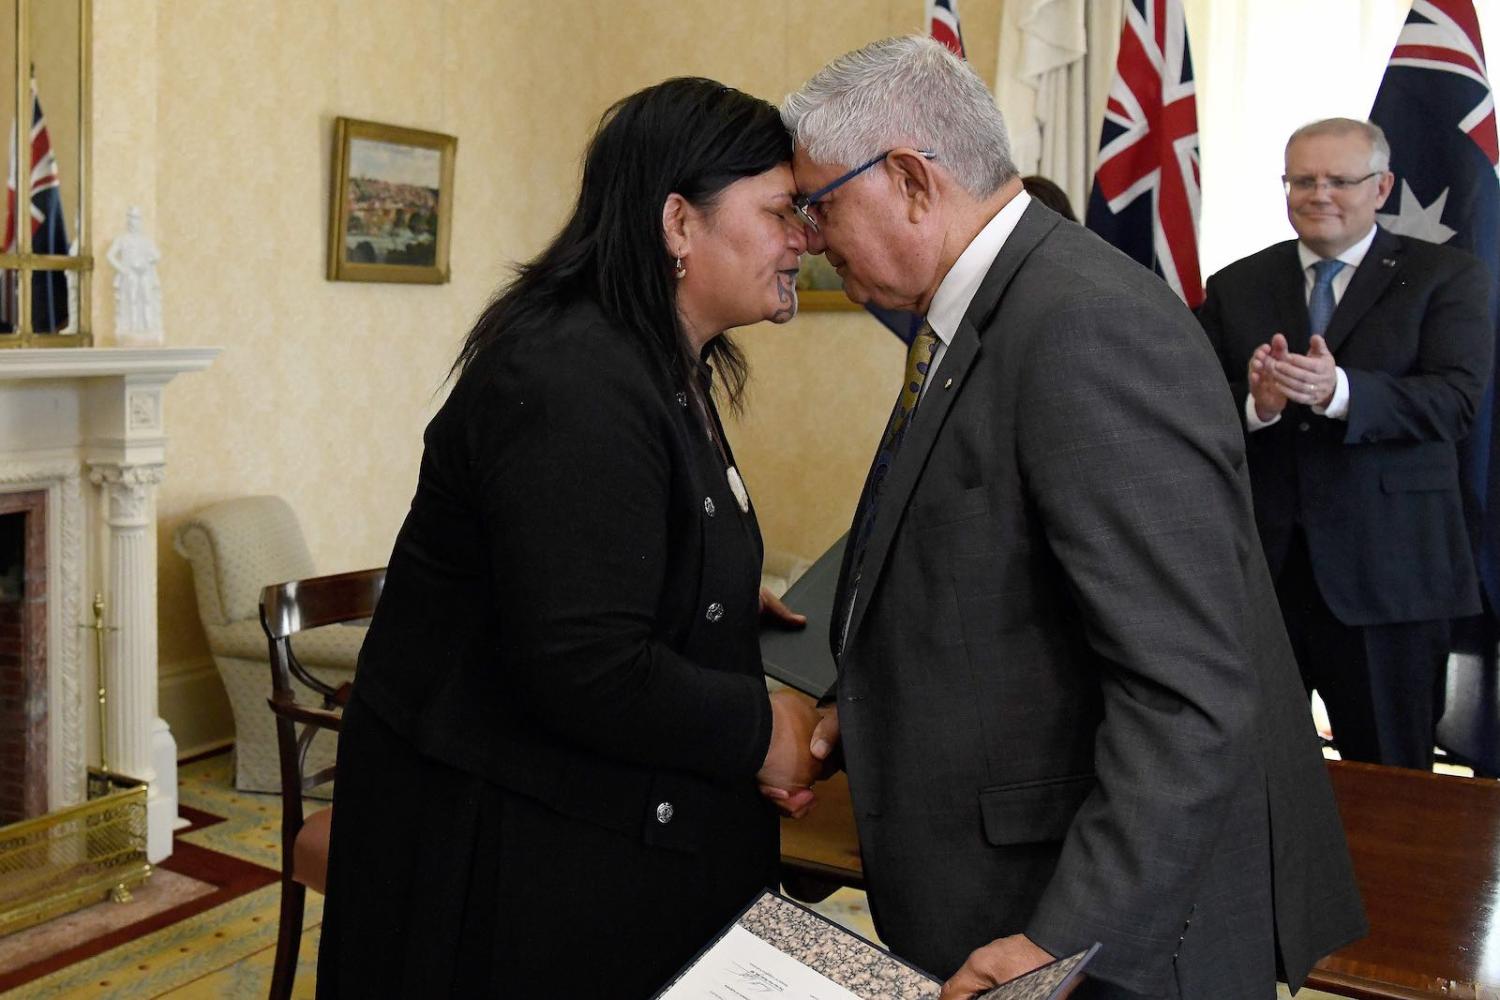 New Zealand’s Nanaia Mahuta, before becoming Foreign Minister, on a trip to Australia in February 2020 greeting Minister for Indigenous Australians Ken Wyatt (Bianca De Marchi/AFP via Getty Images)